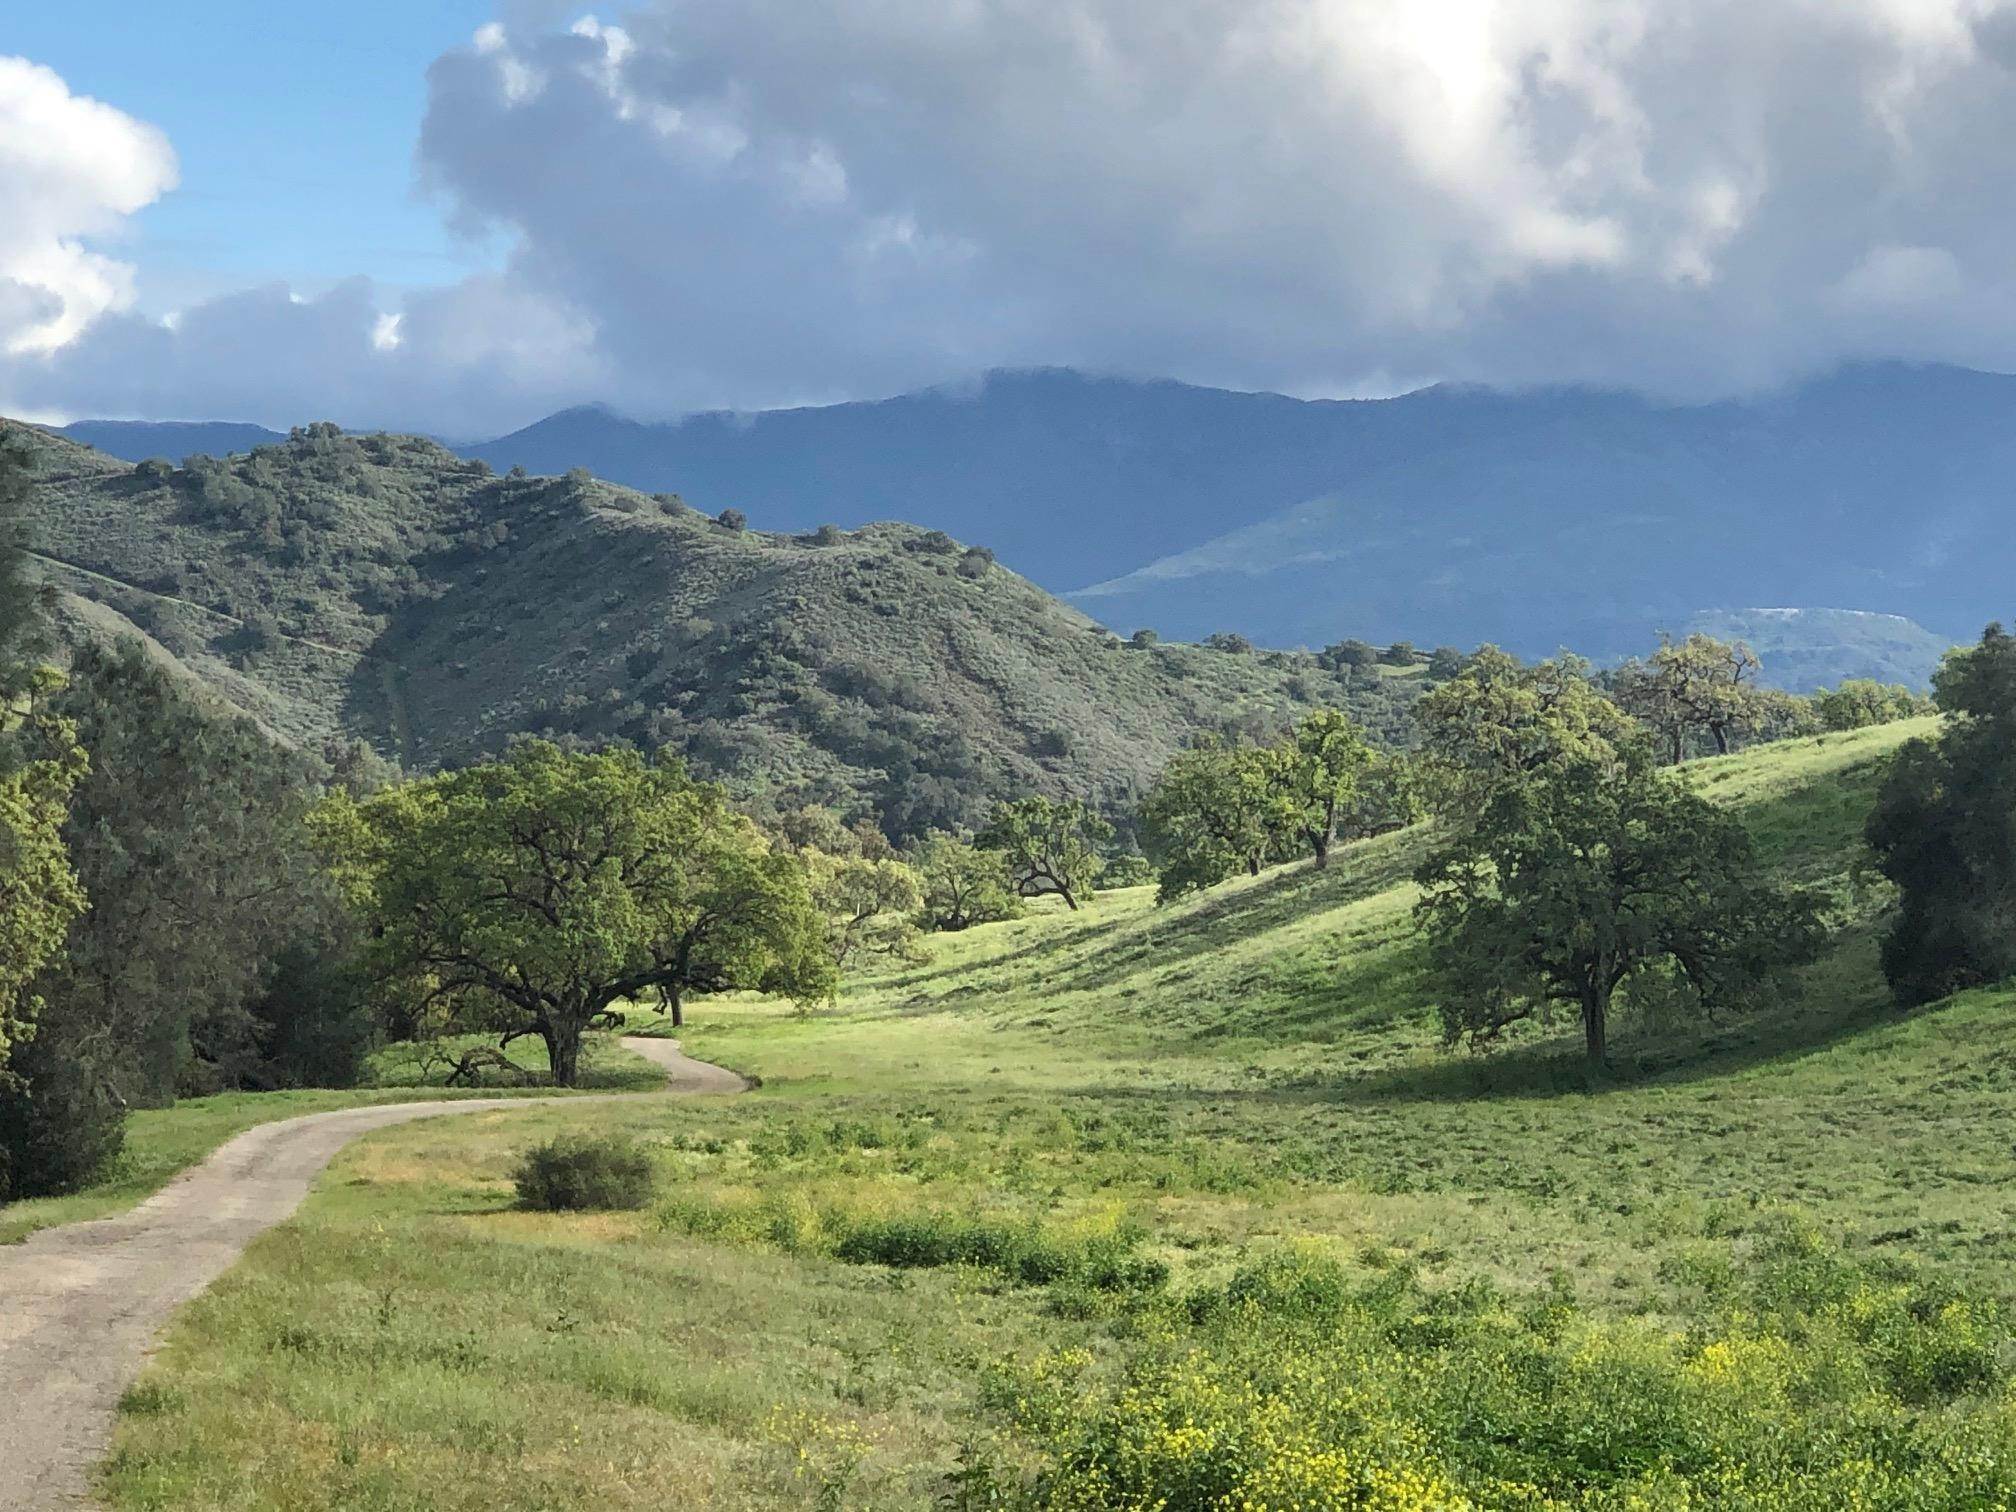 Farm and Ranch Properties for Sale at 7355 Happy Canyon Road Santa Ynez, California 93460 United States